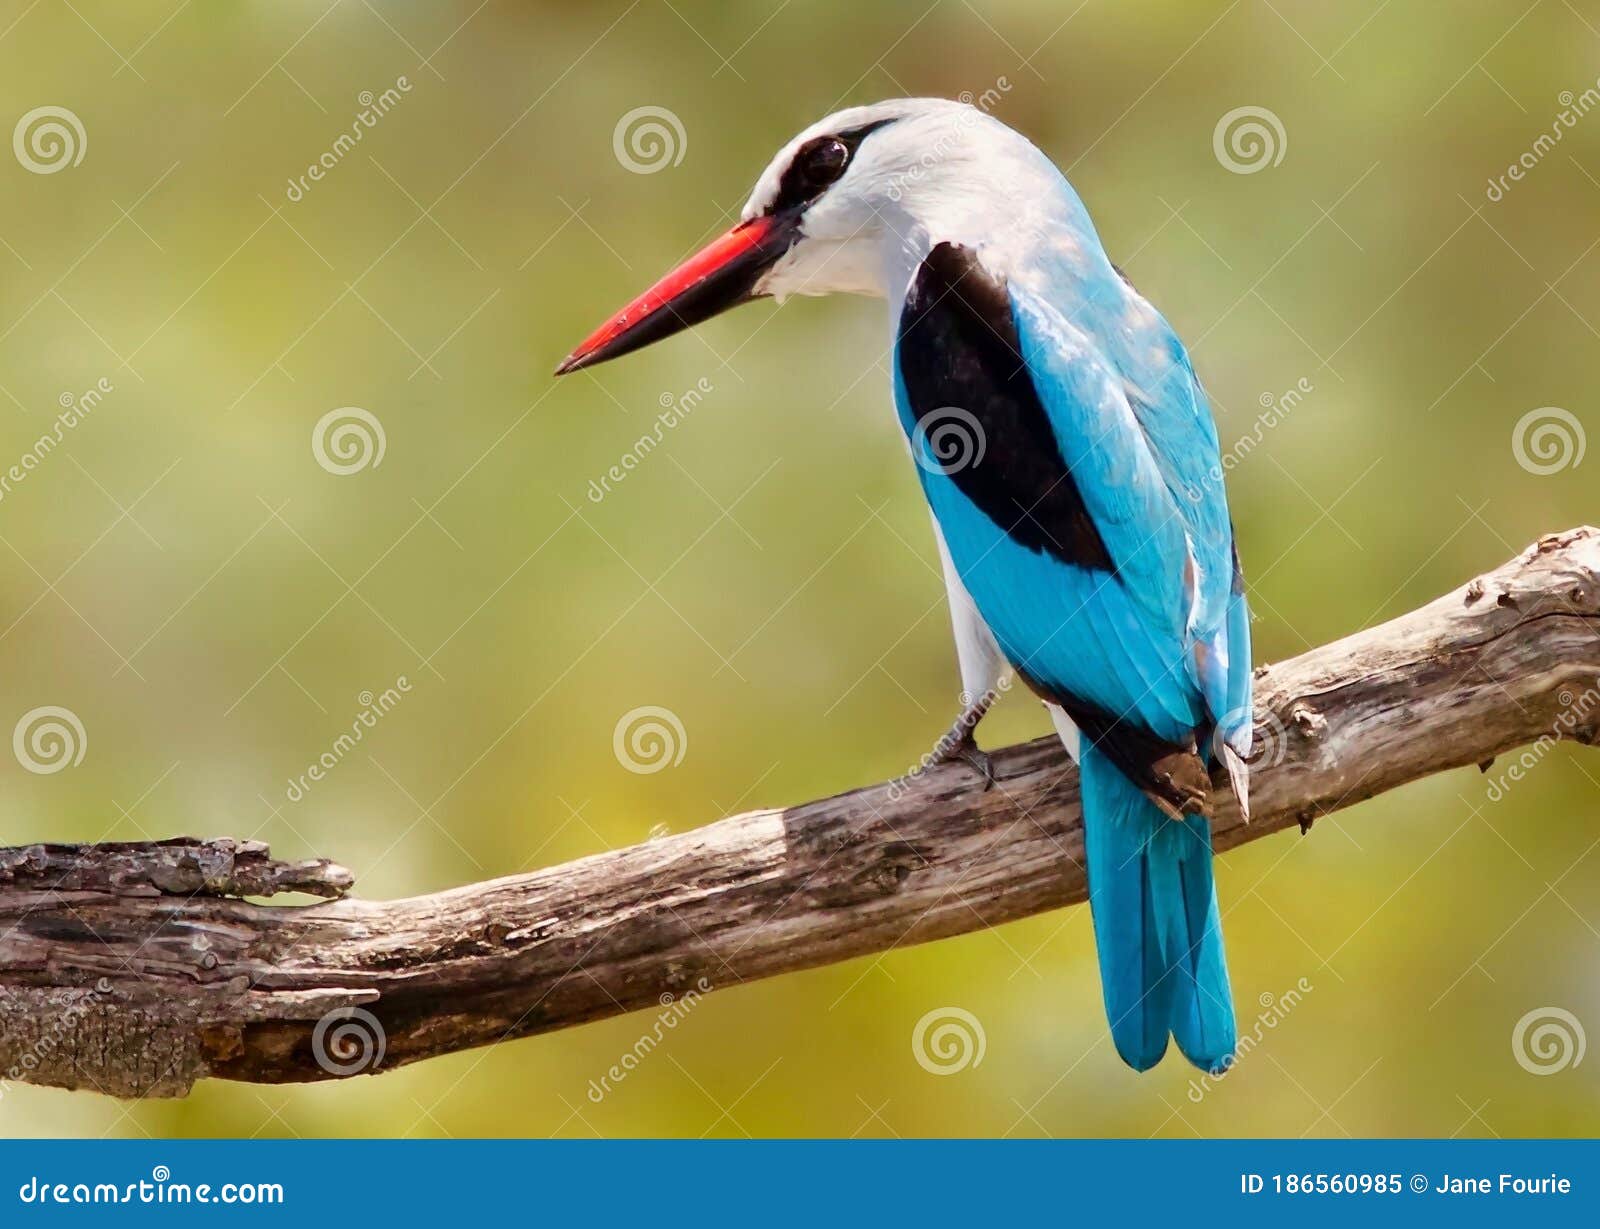 Bird, Woodland Kingfisher Perching on a Branch Stock Image - Image of ...